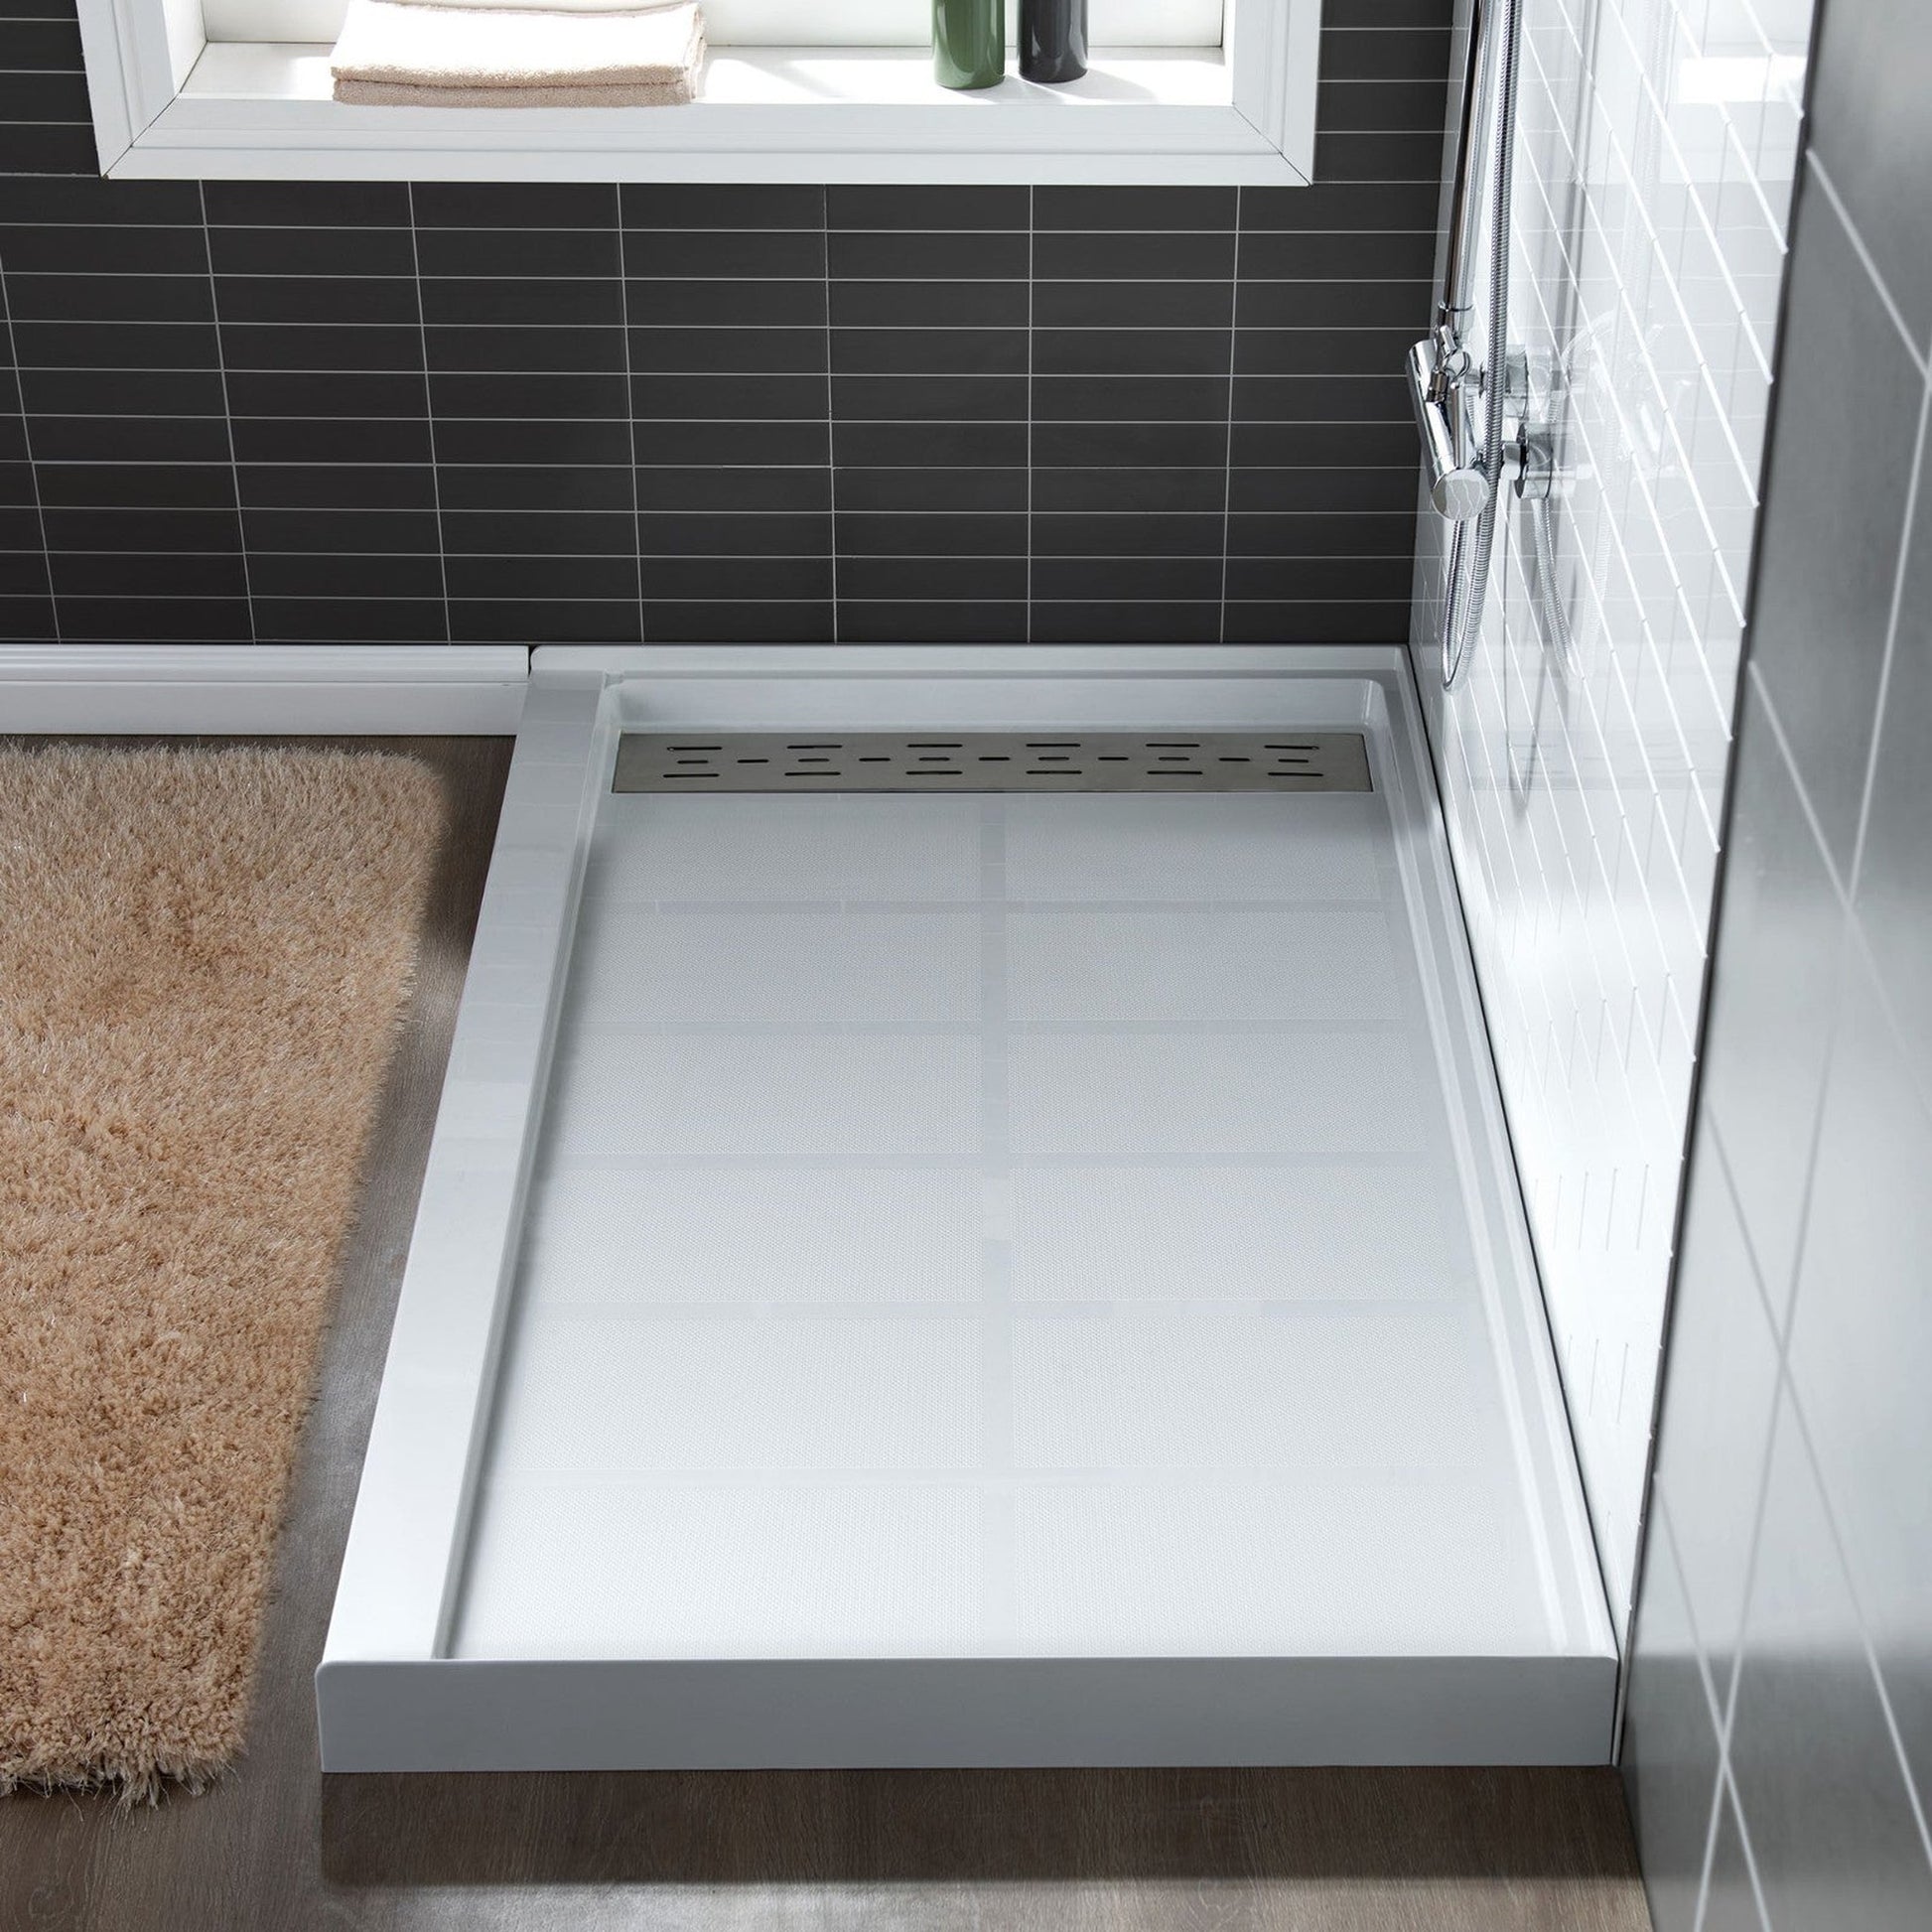 WoodBridge 60" x 32" White Solid Surface Shower Base Left Drain Location With Brushed Nickel Trench Drain Cover